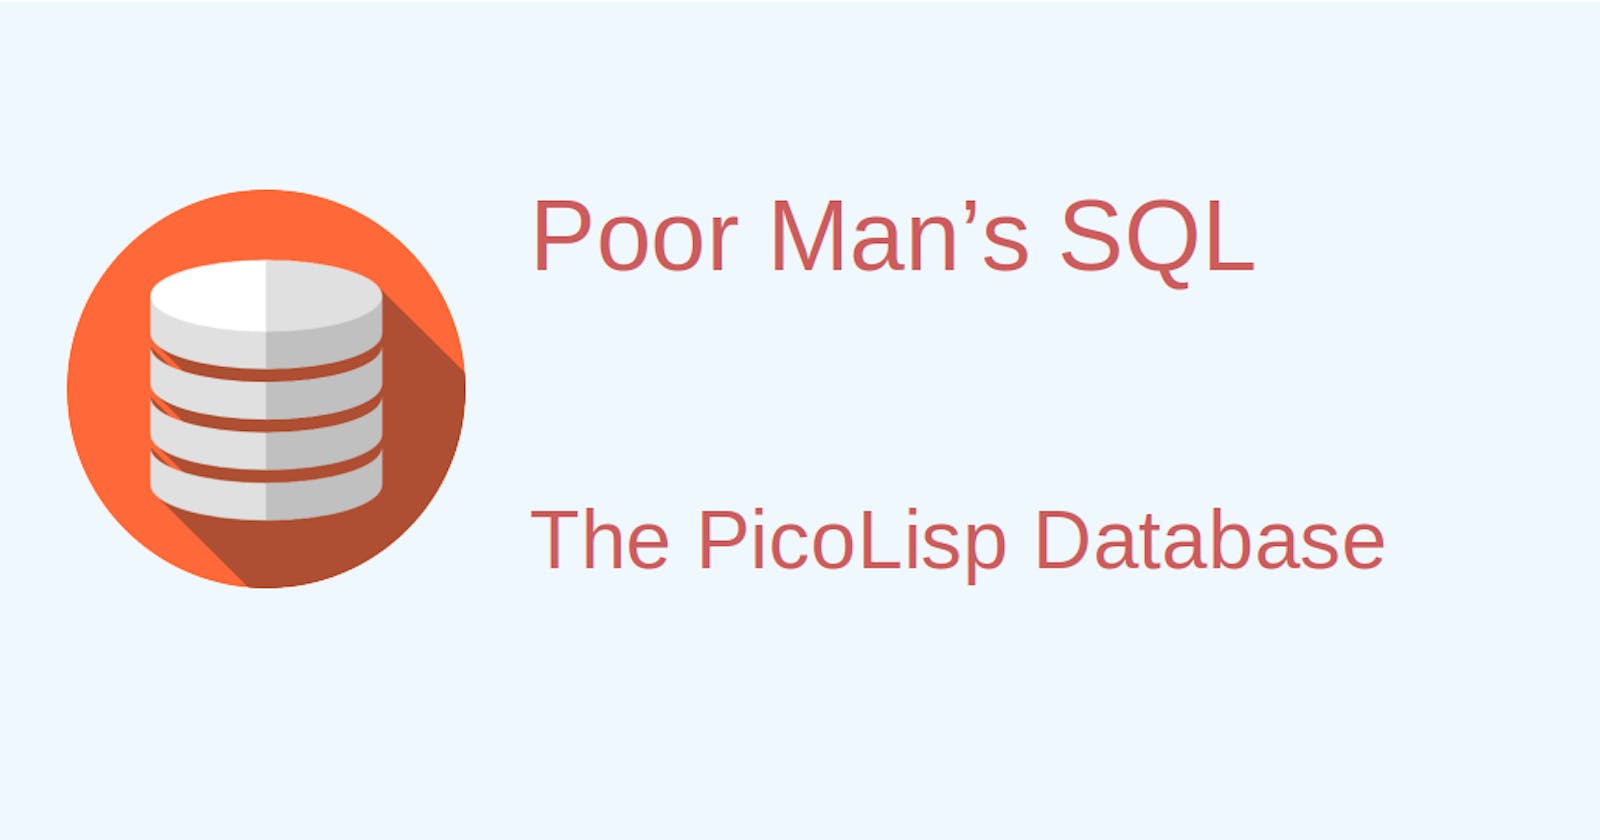 "Poor Man's SQL": Accessing the PicoLisp Database with SELECT